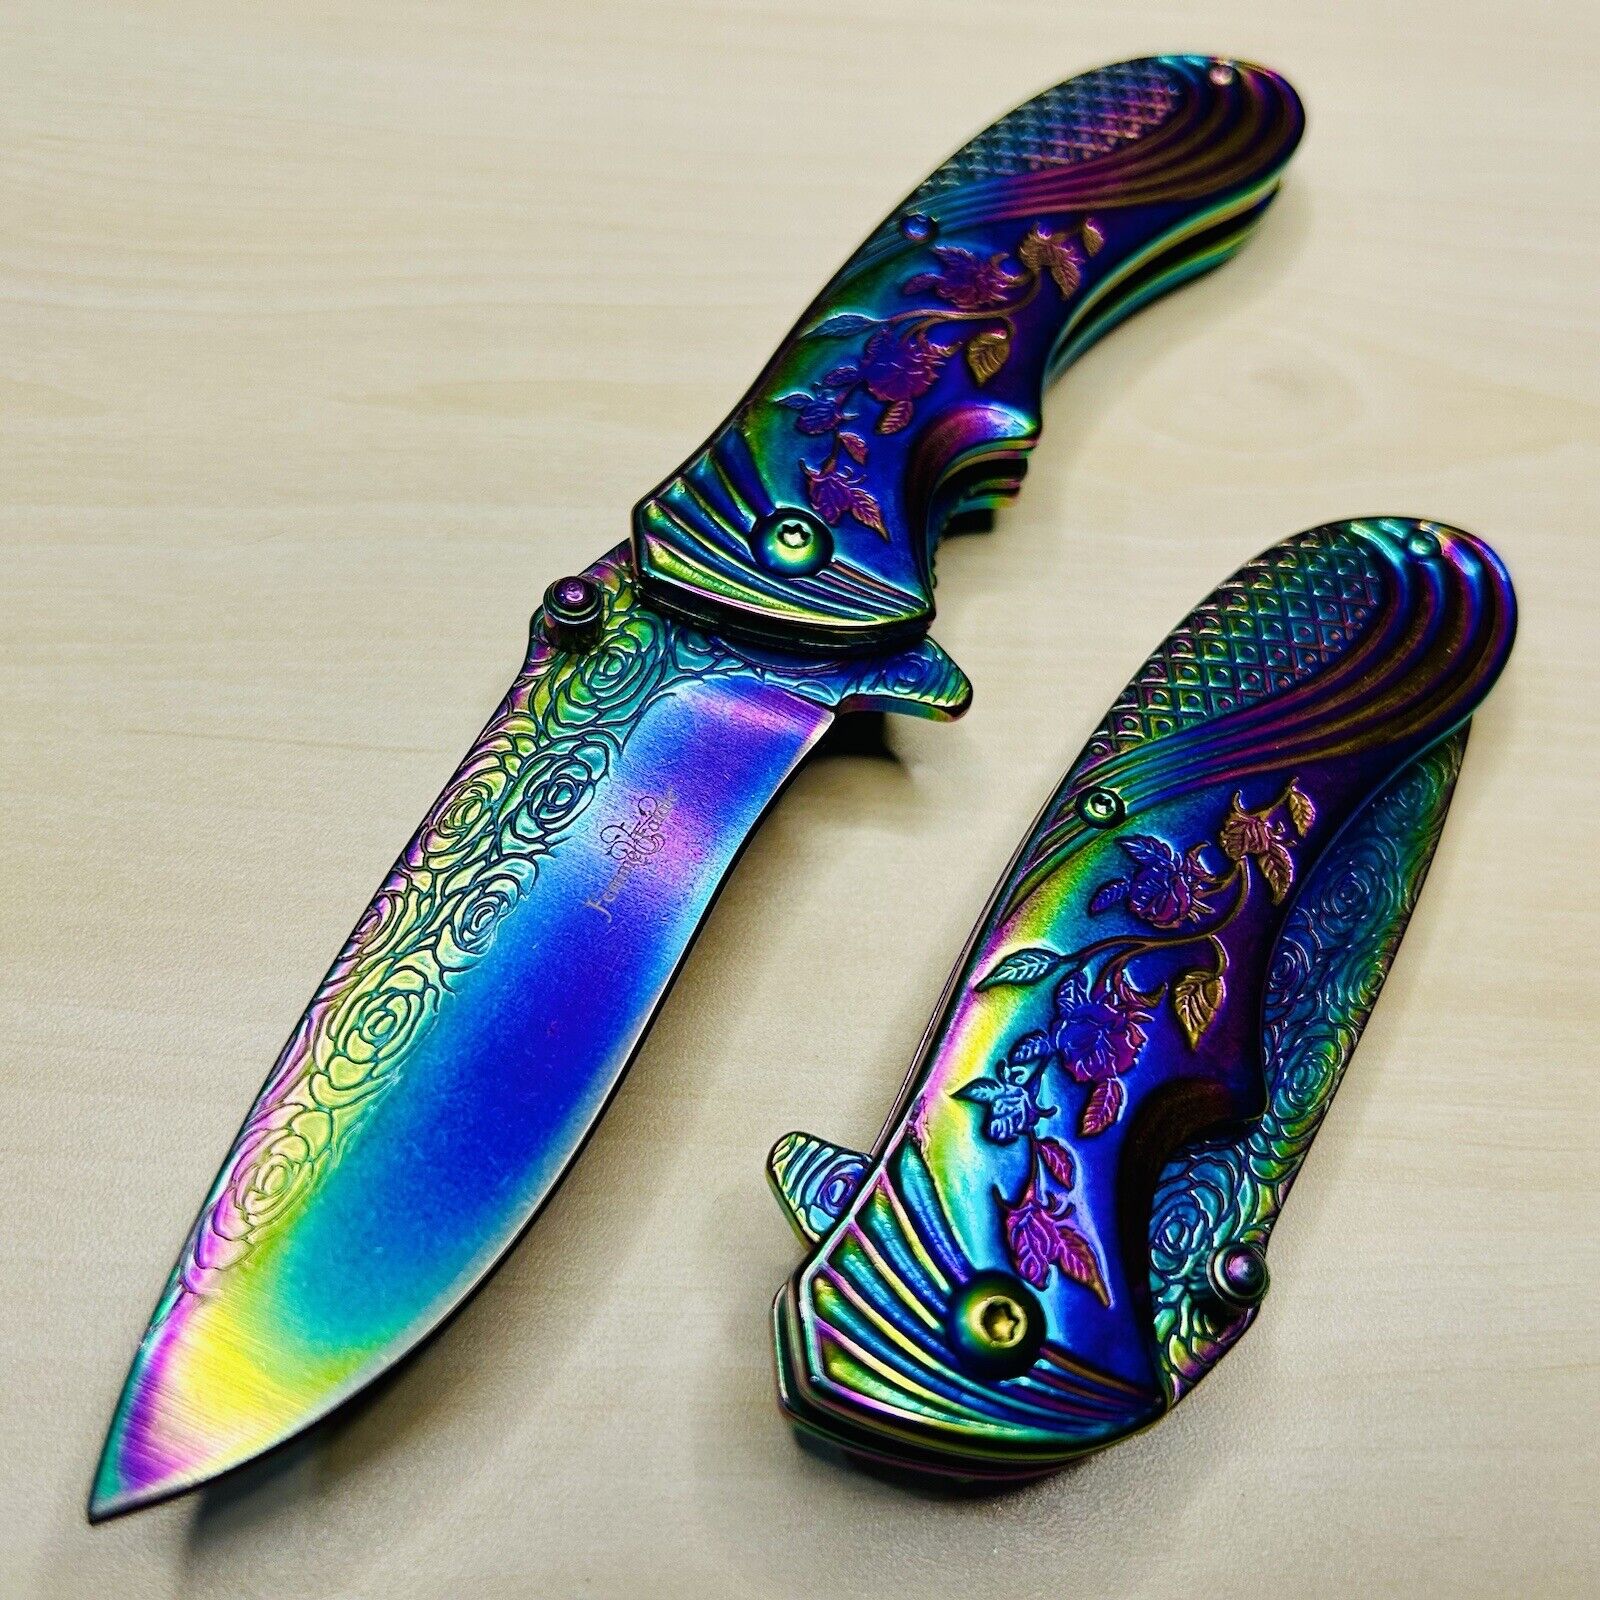 7” Rainbow Luxury Rose Tactical Spring Assisted Open Blade Folding Pocket Knife